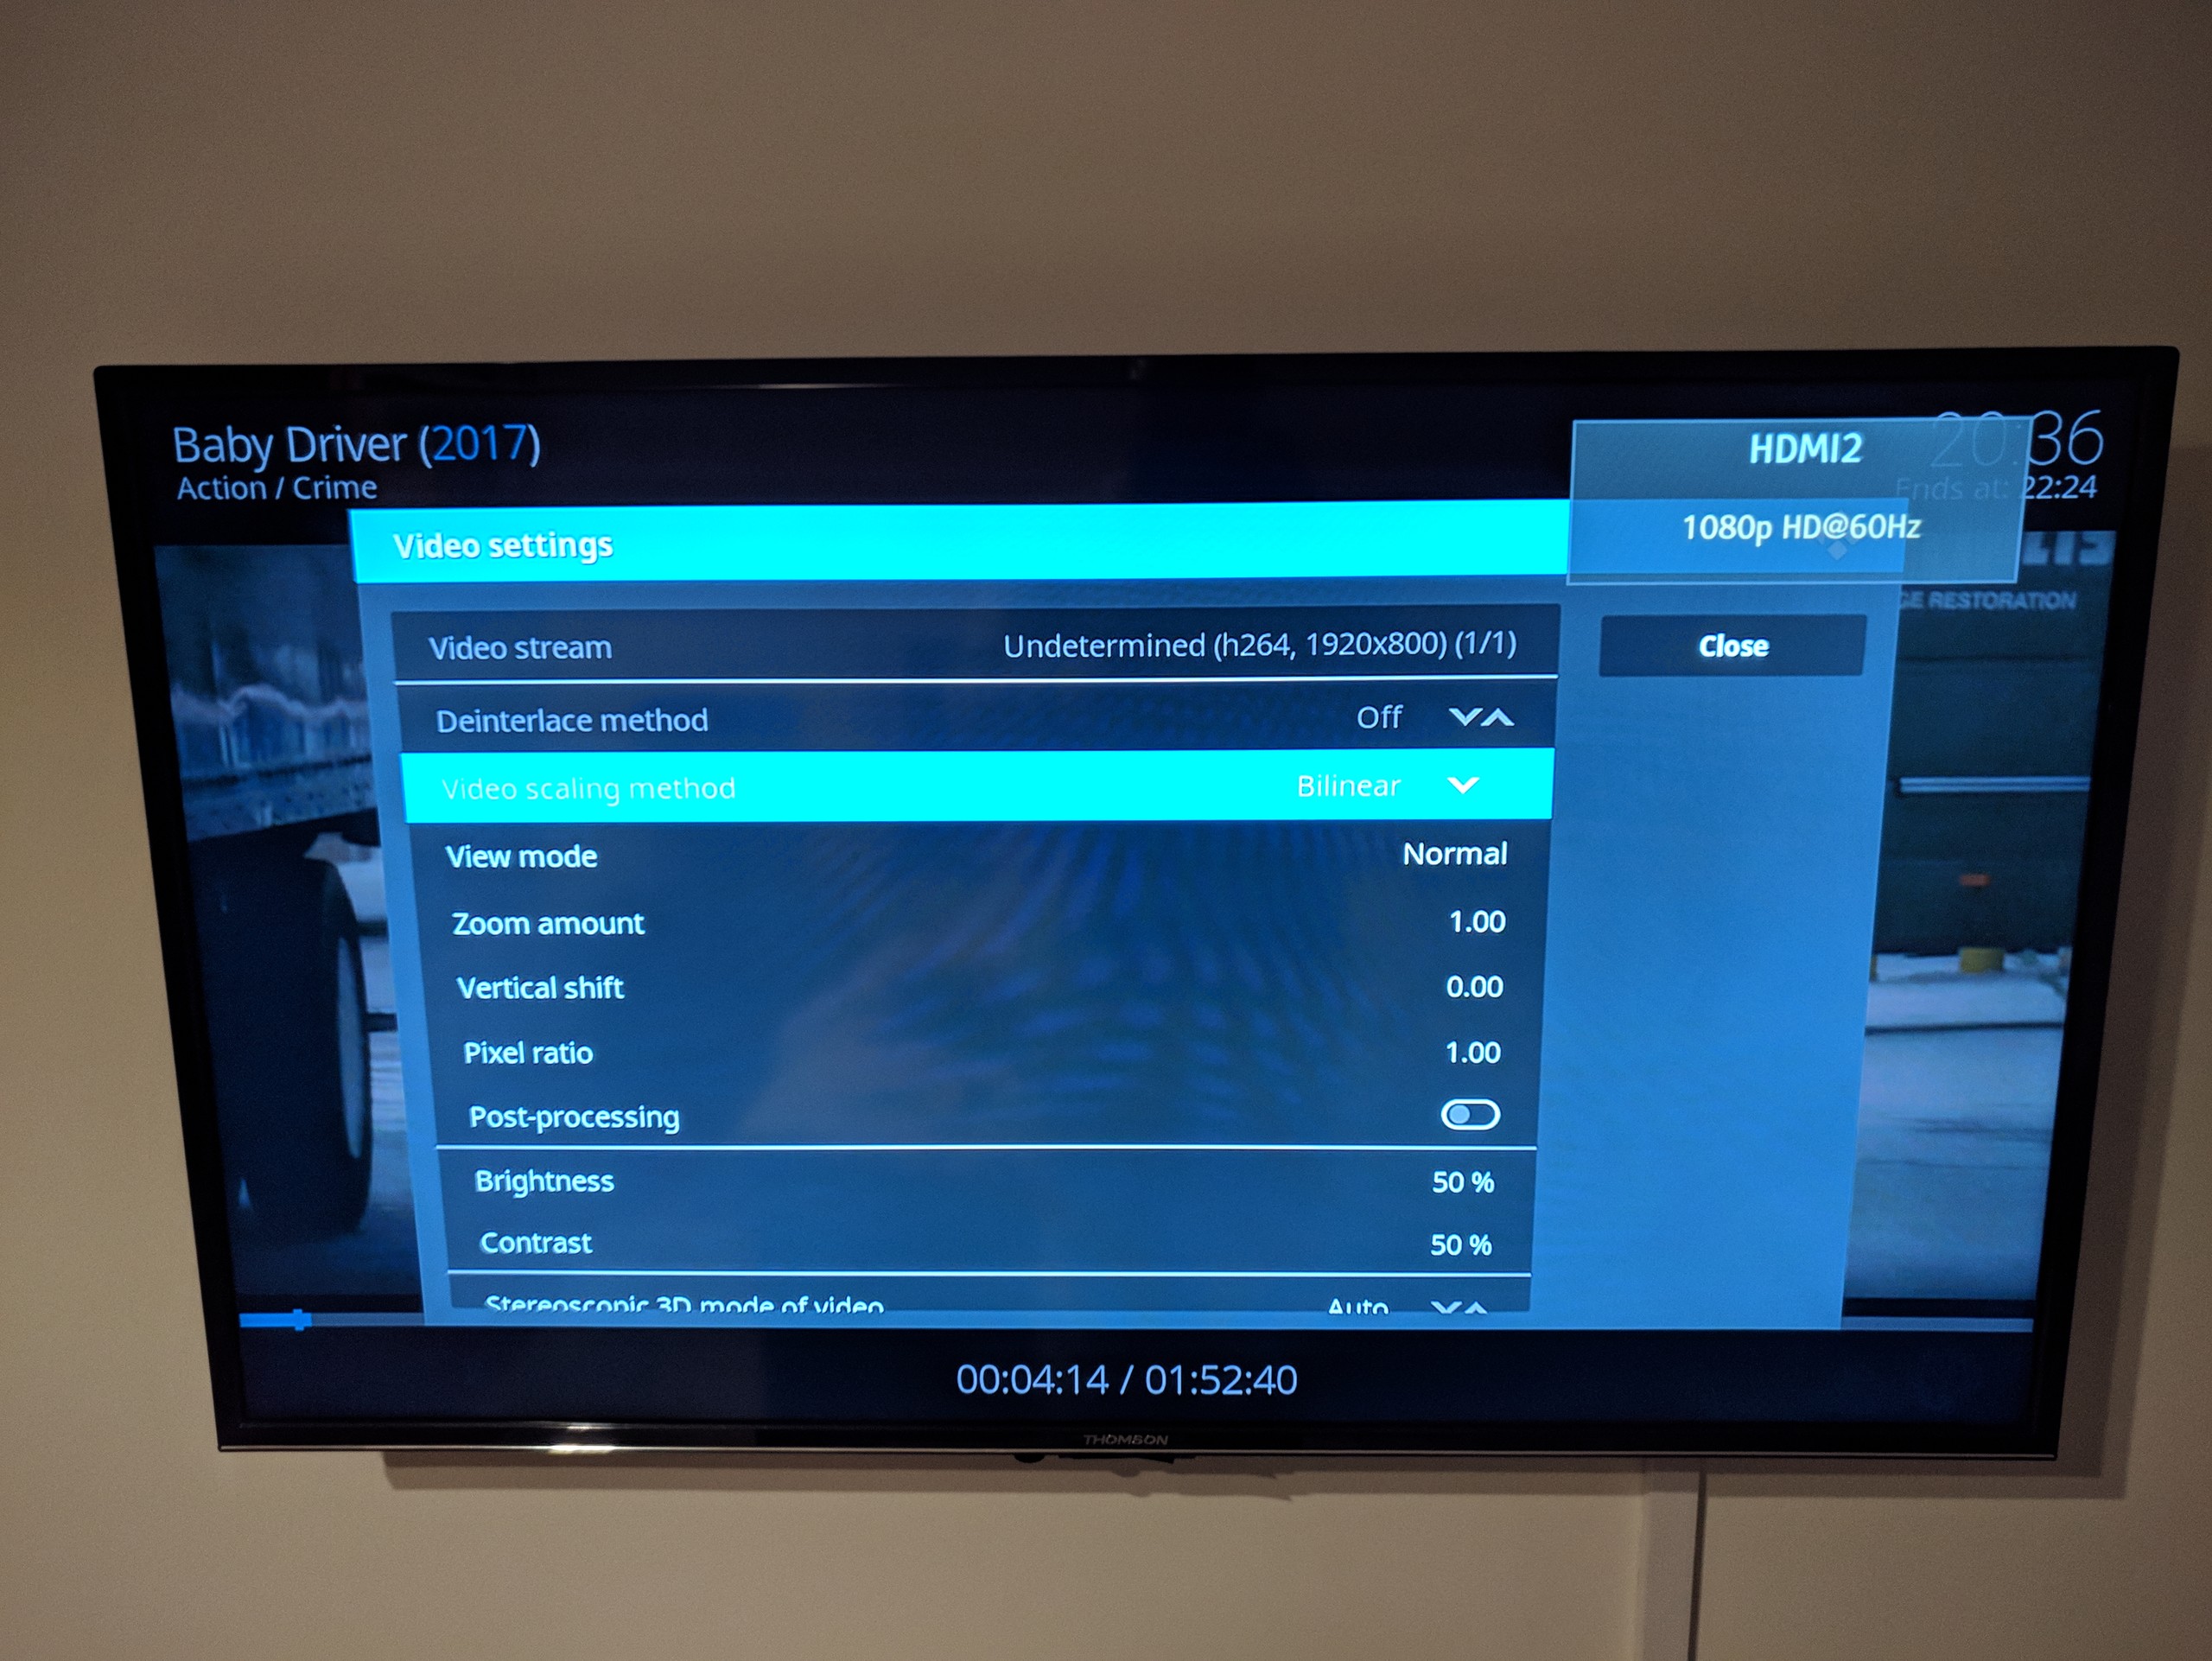 can a 720p tv display 1080p